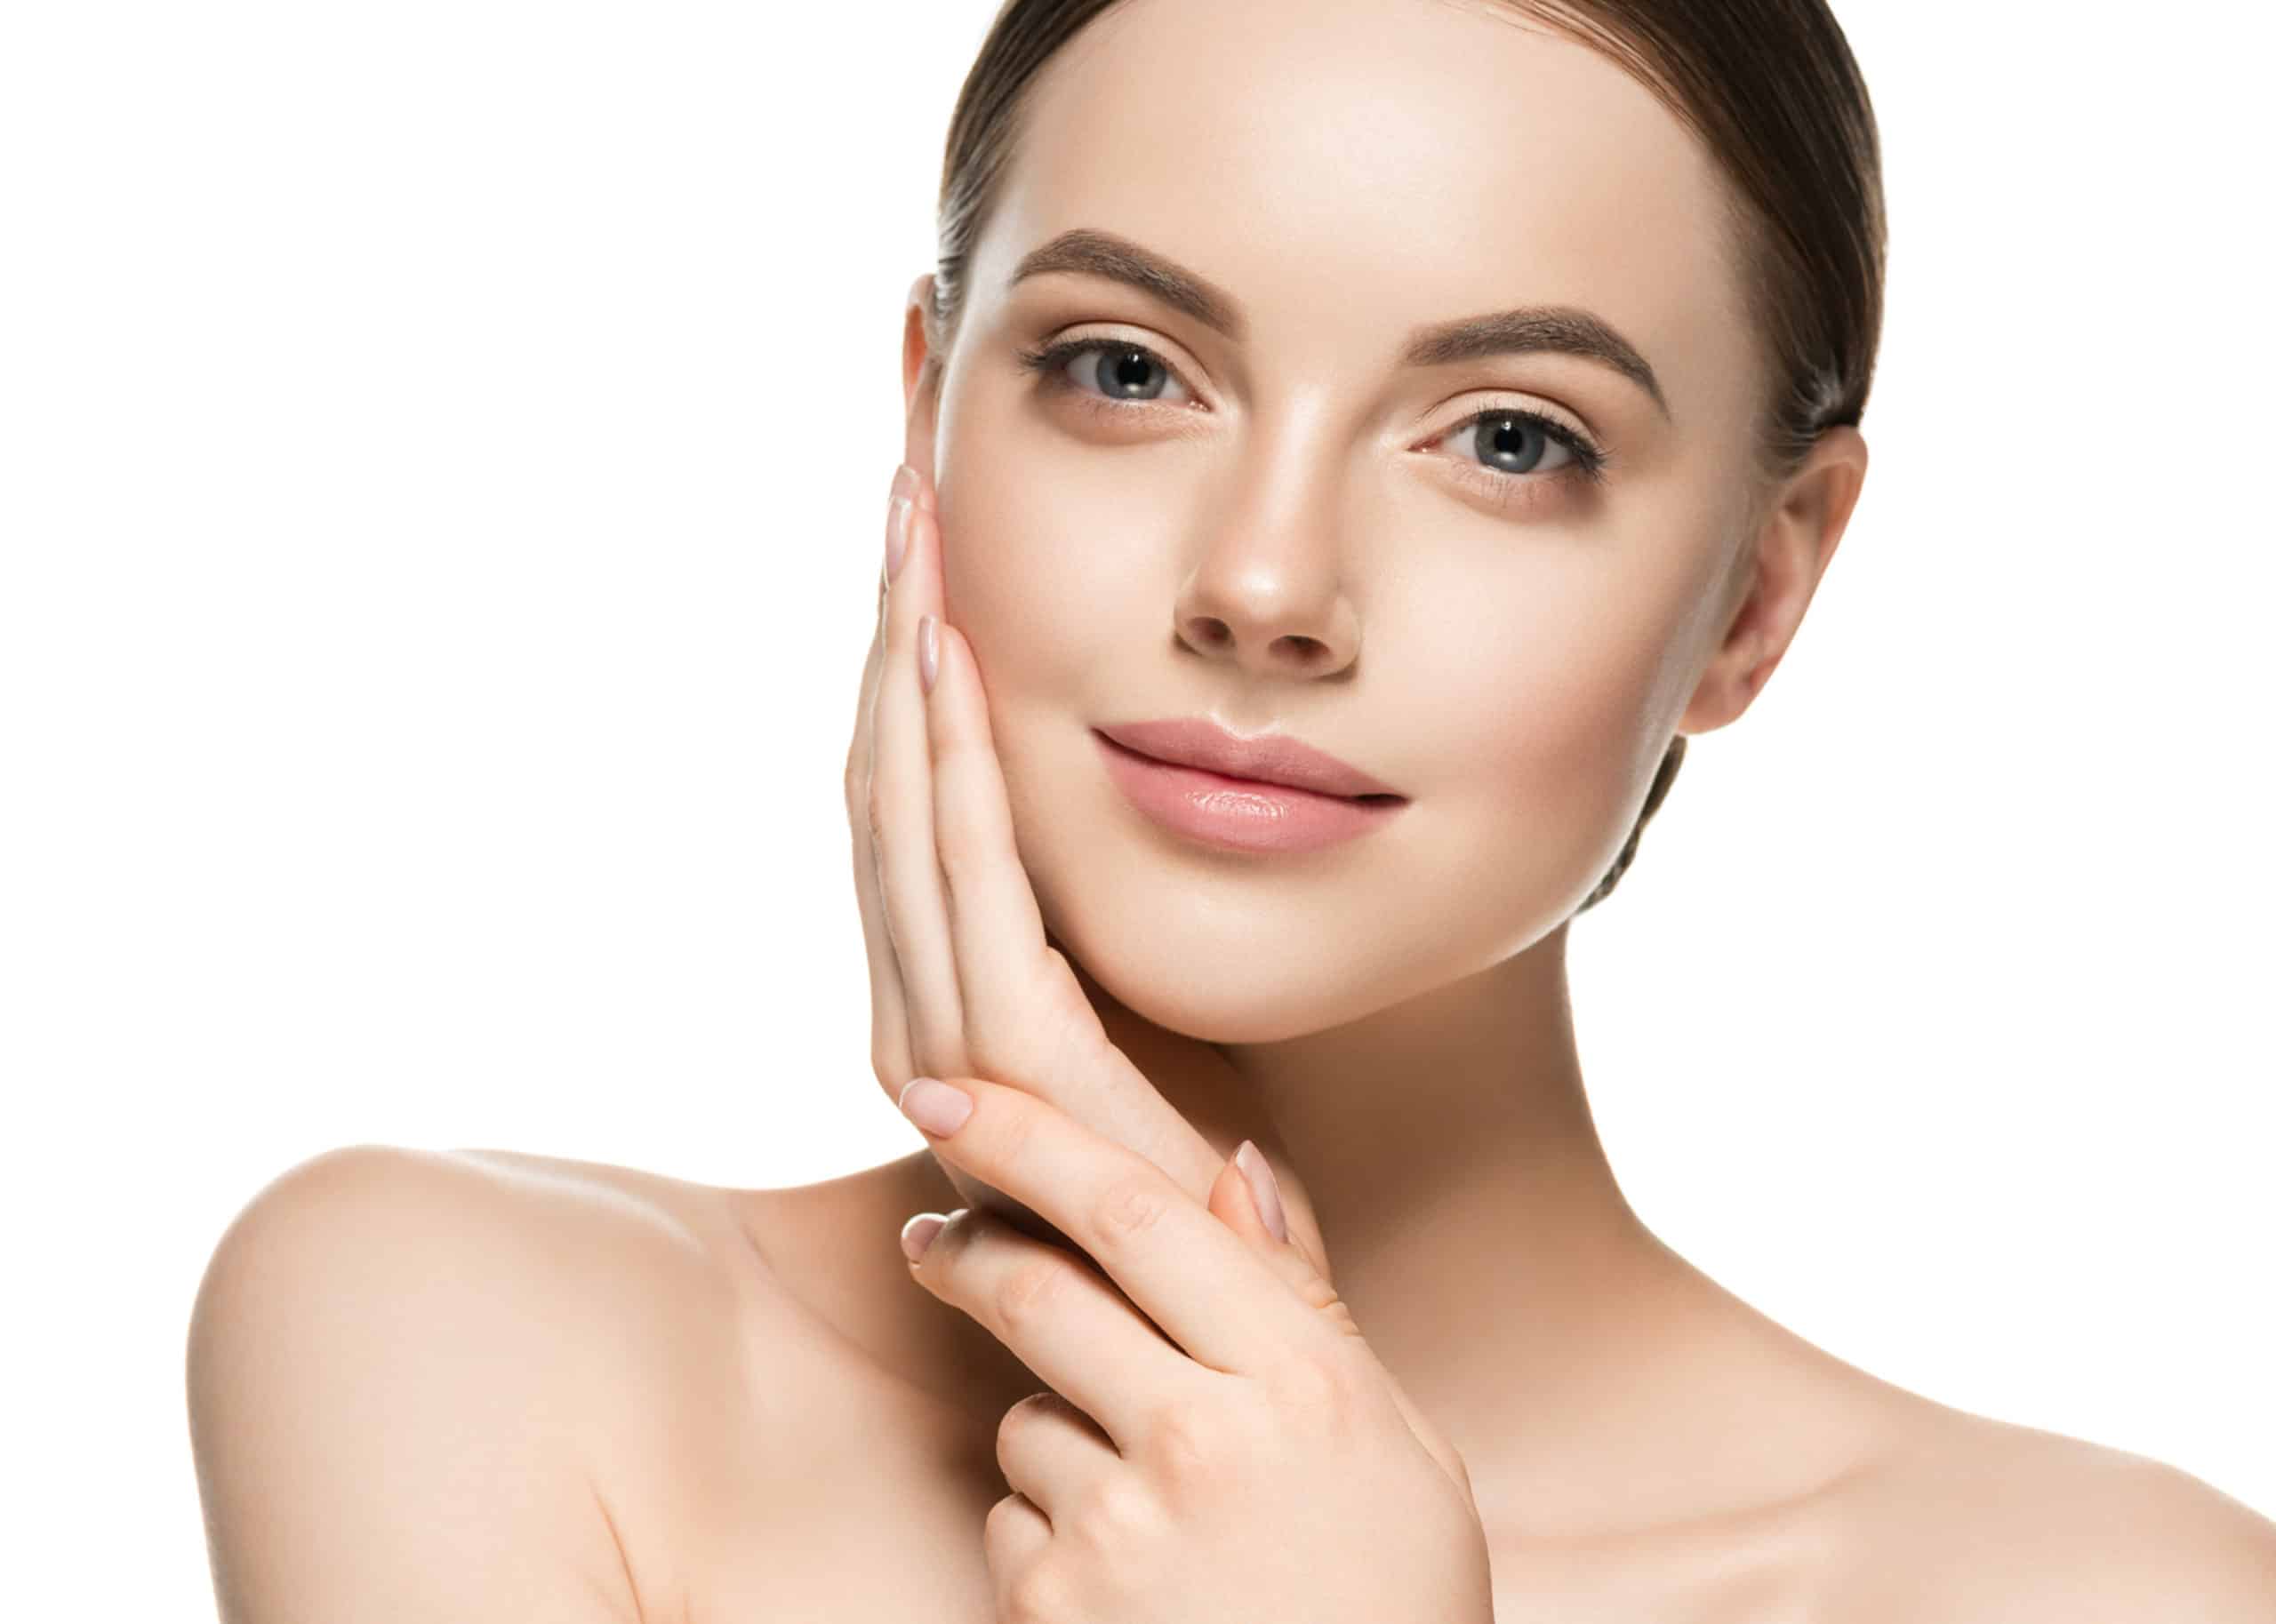 Lady with Glowing and charming skin | Get DiamondGlow™ Facial at Euro Look Medical Spa in Solon, Ohio